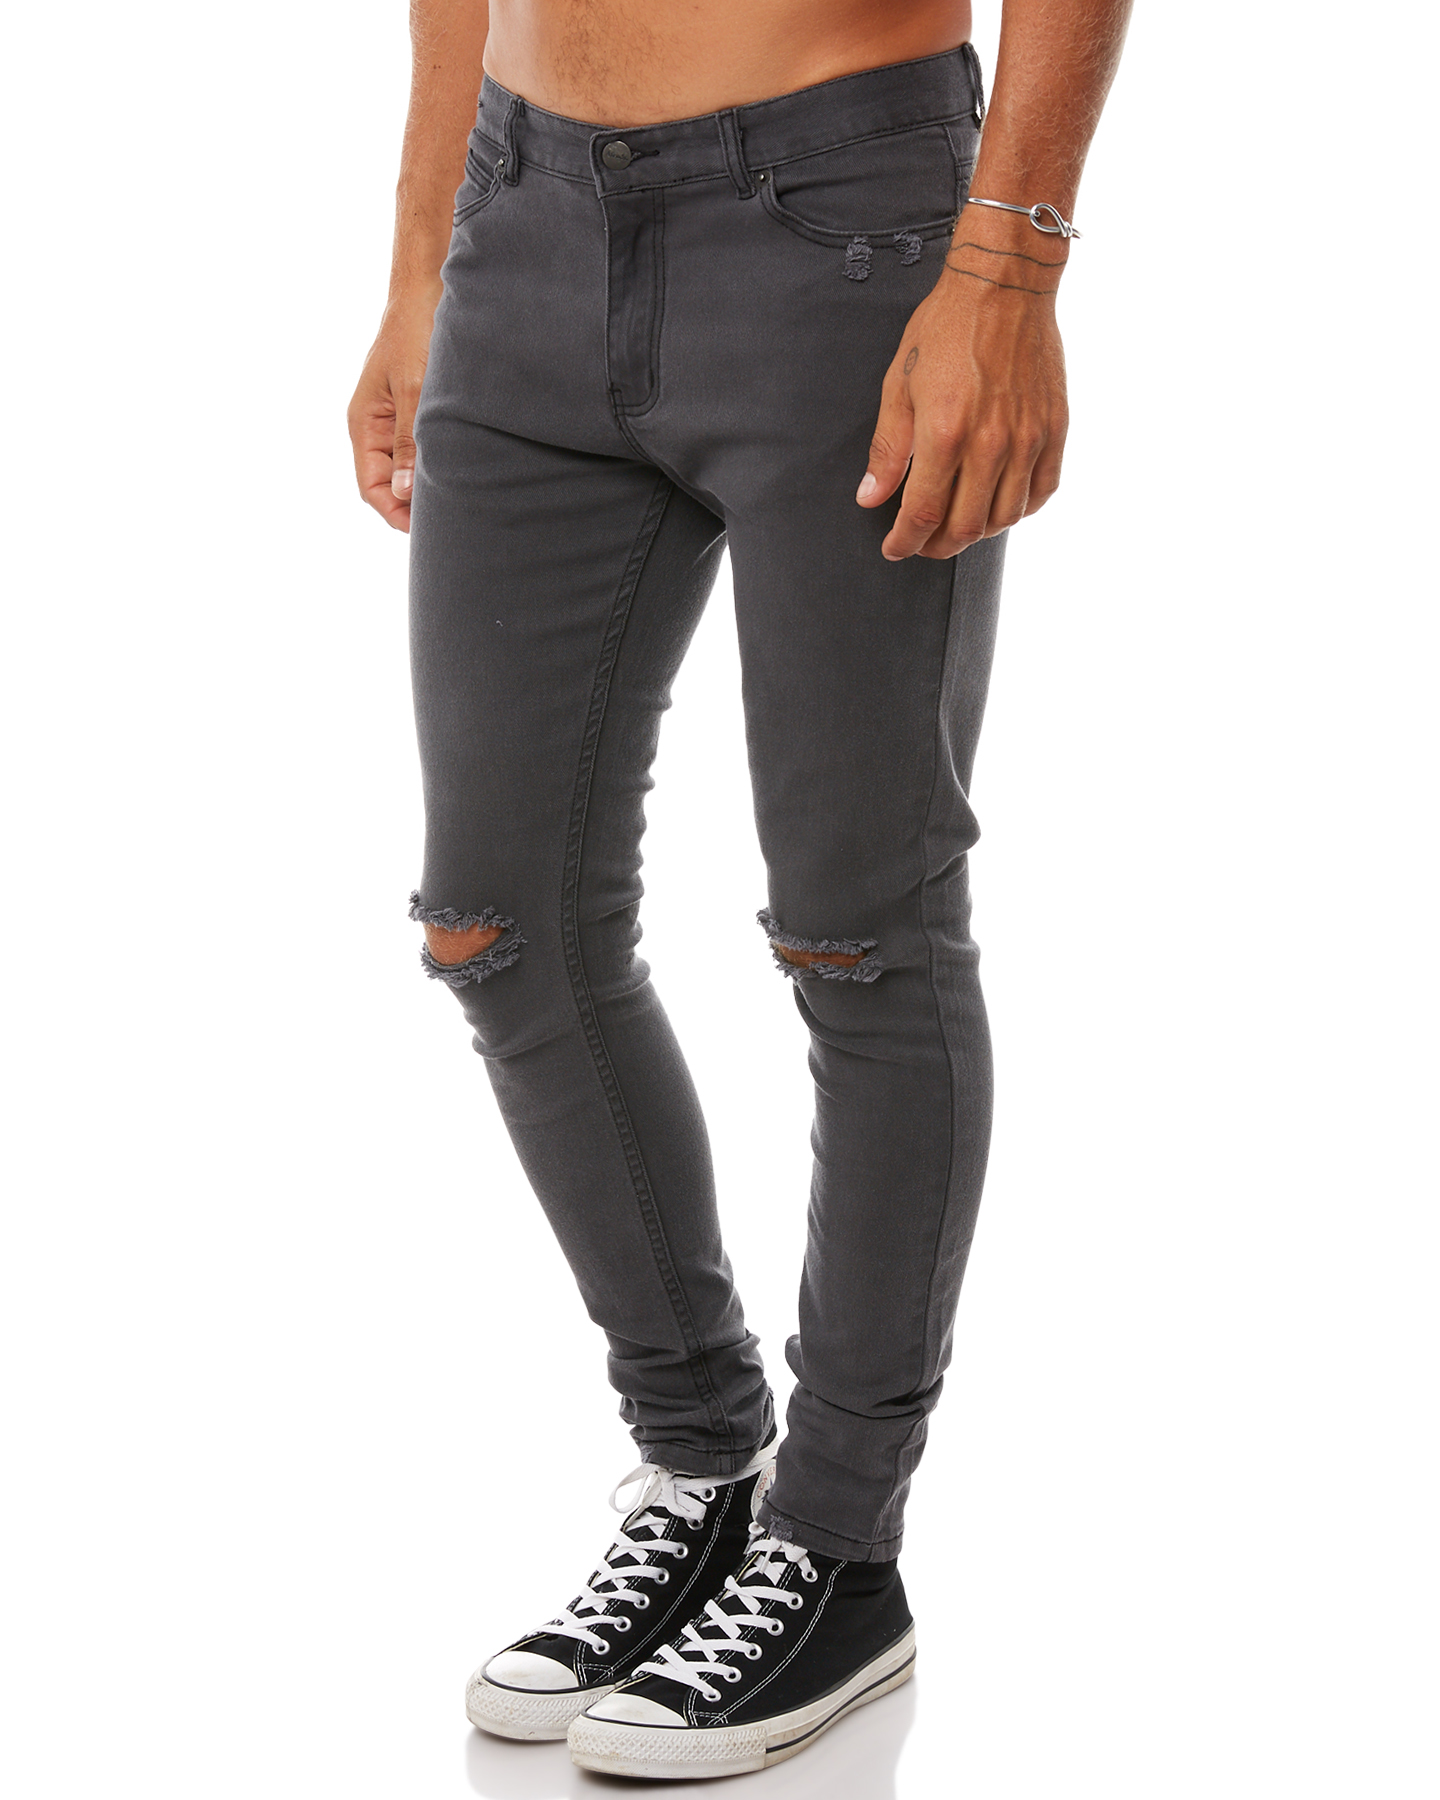 Afends Beat Junky Mens Jean - Faded Black | SurfStitch